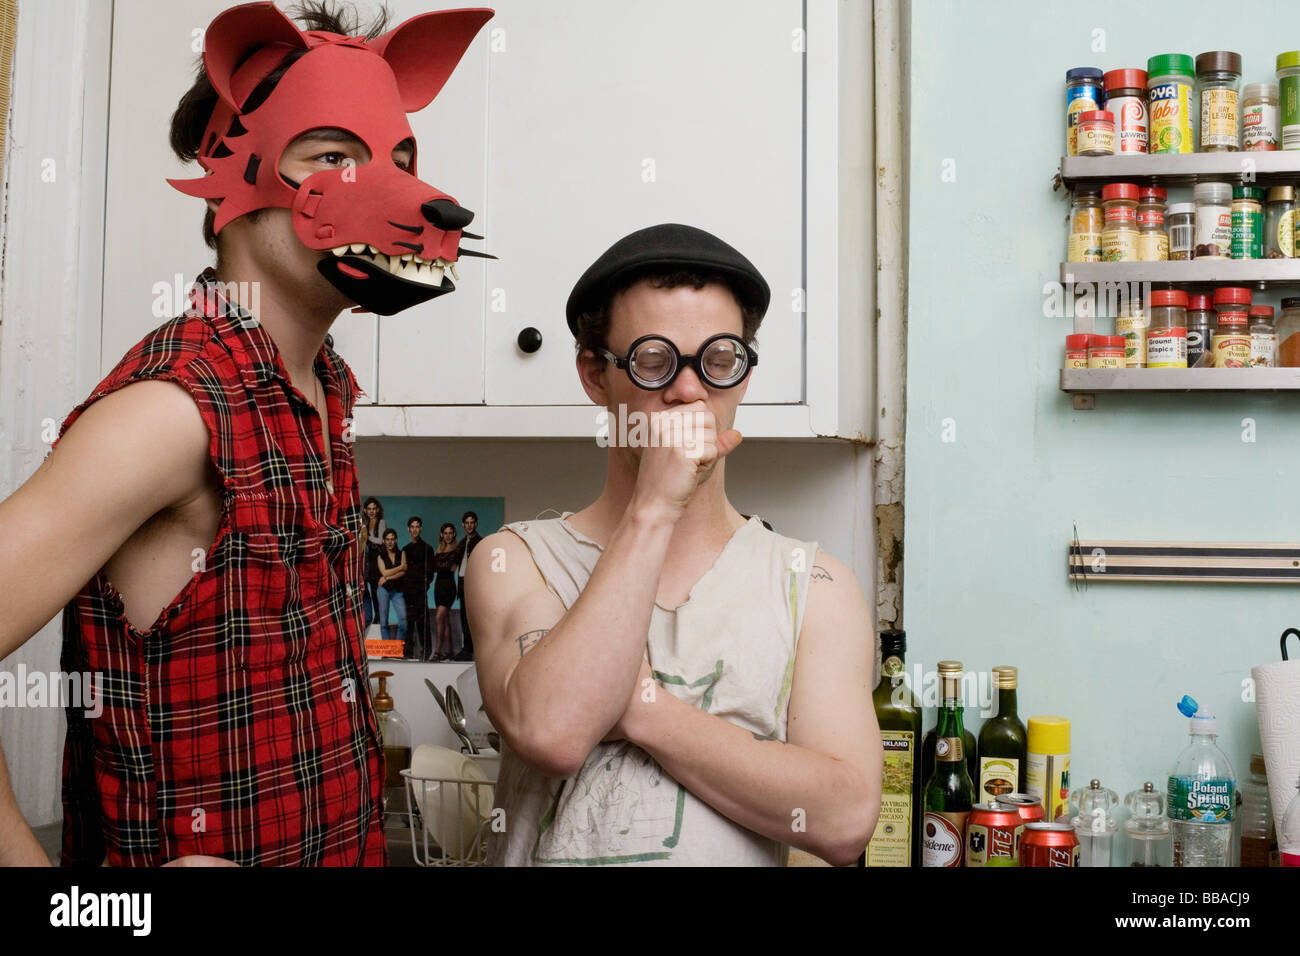 Two young men standing in a kitchen wearing silly disguises Stock Photo